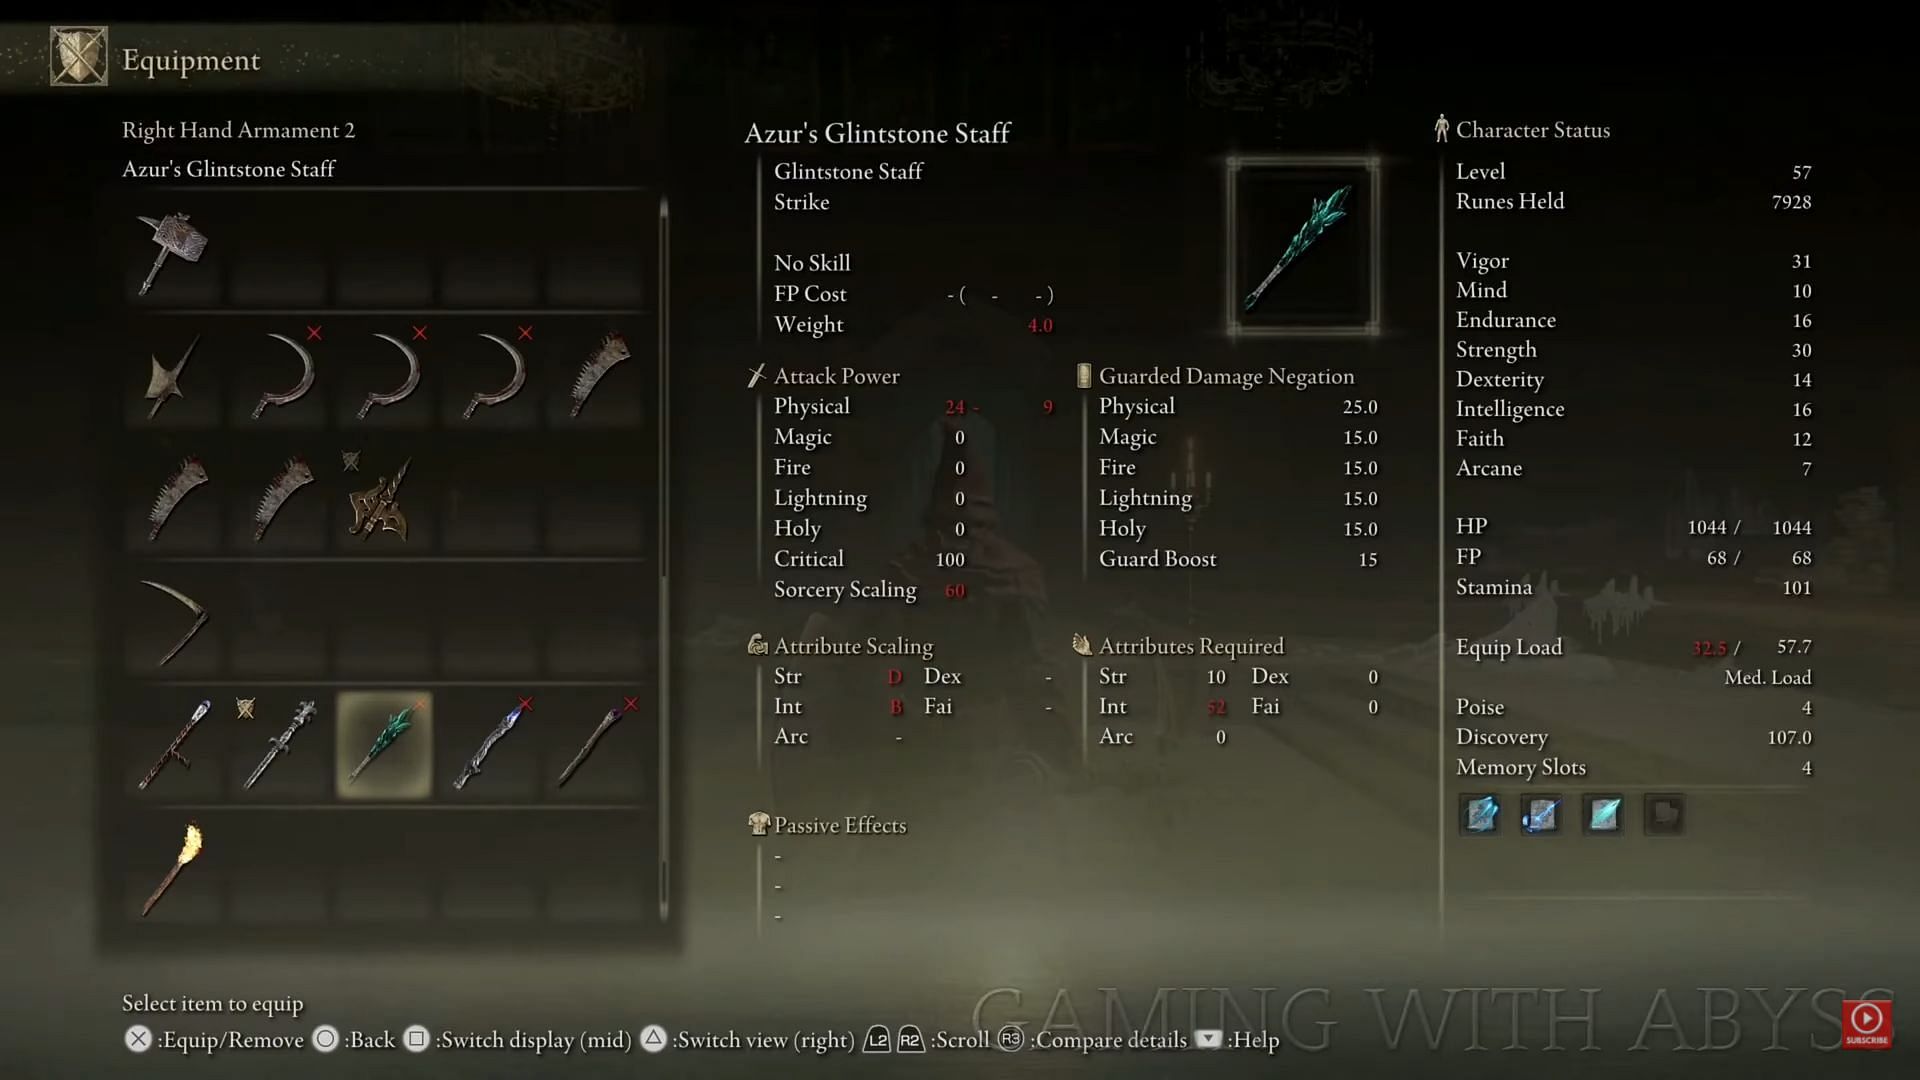 The reduced cast time with this Glintstone Staff is something that can come in handy in Elden Ring (Image via Gaming with Abyss/YouTube)